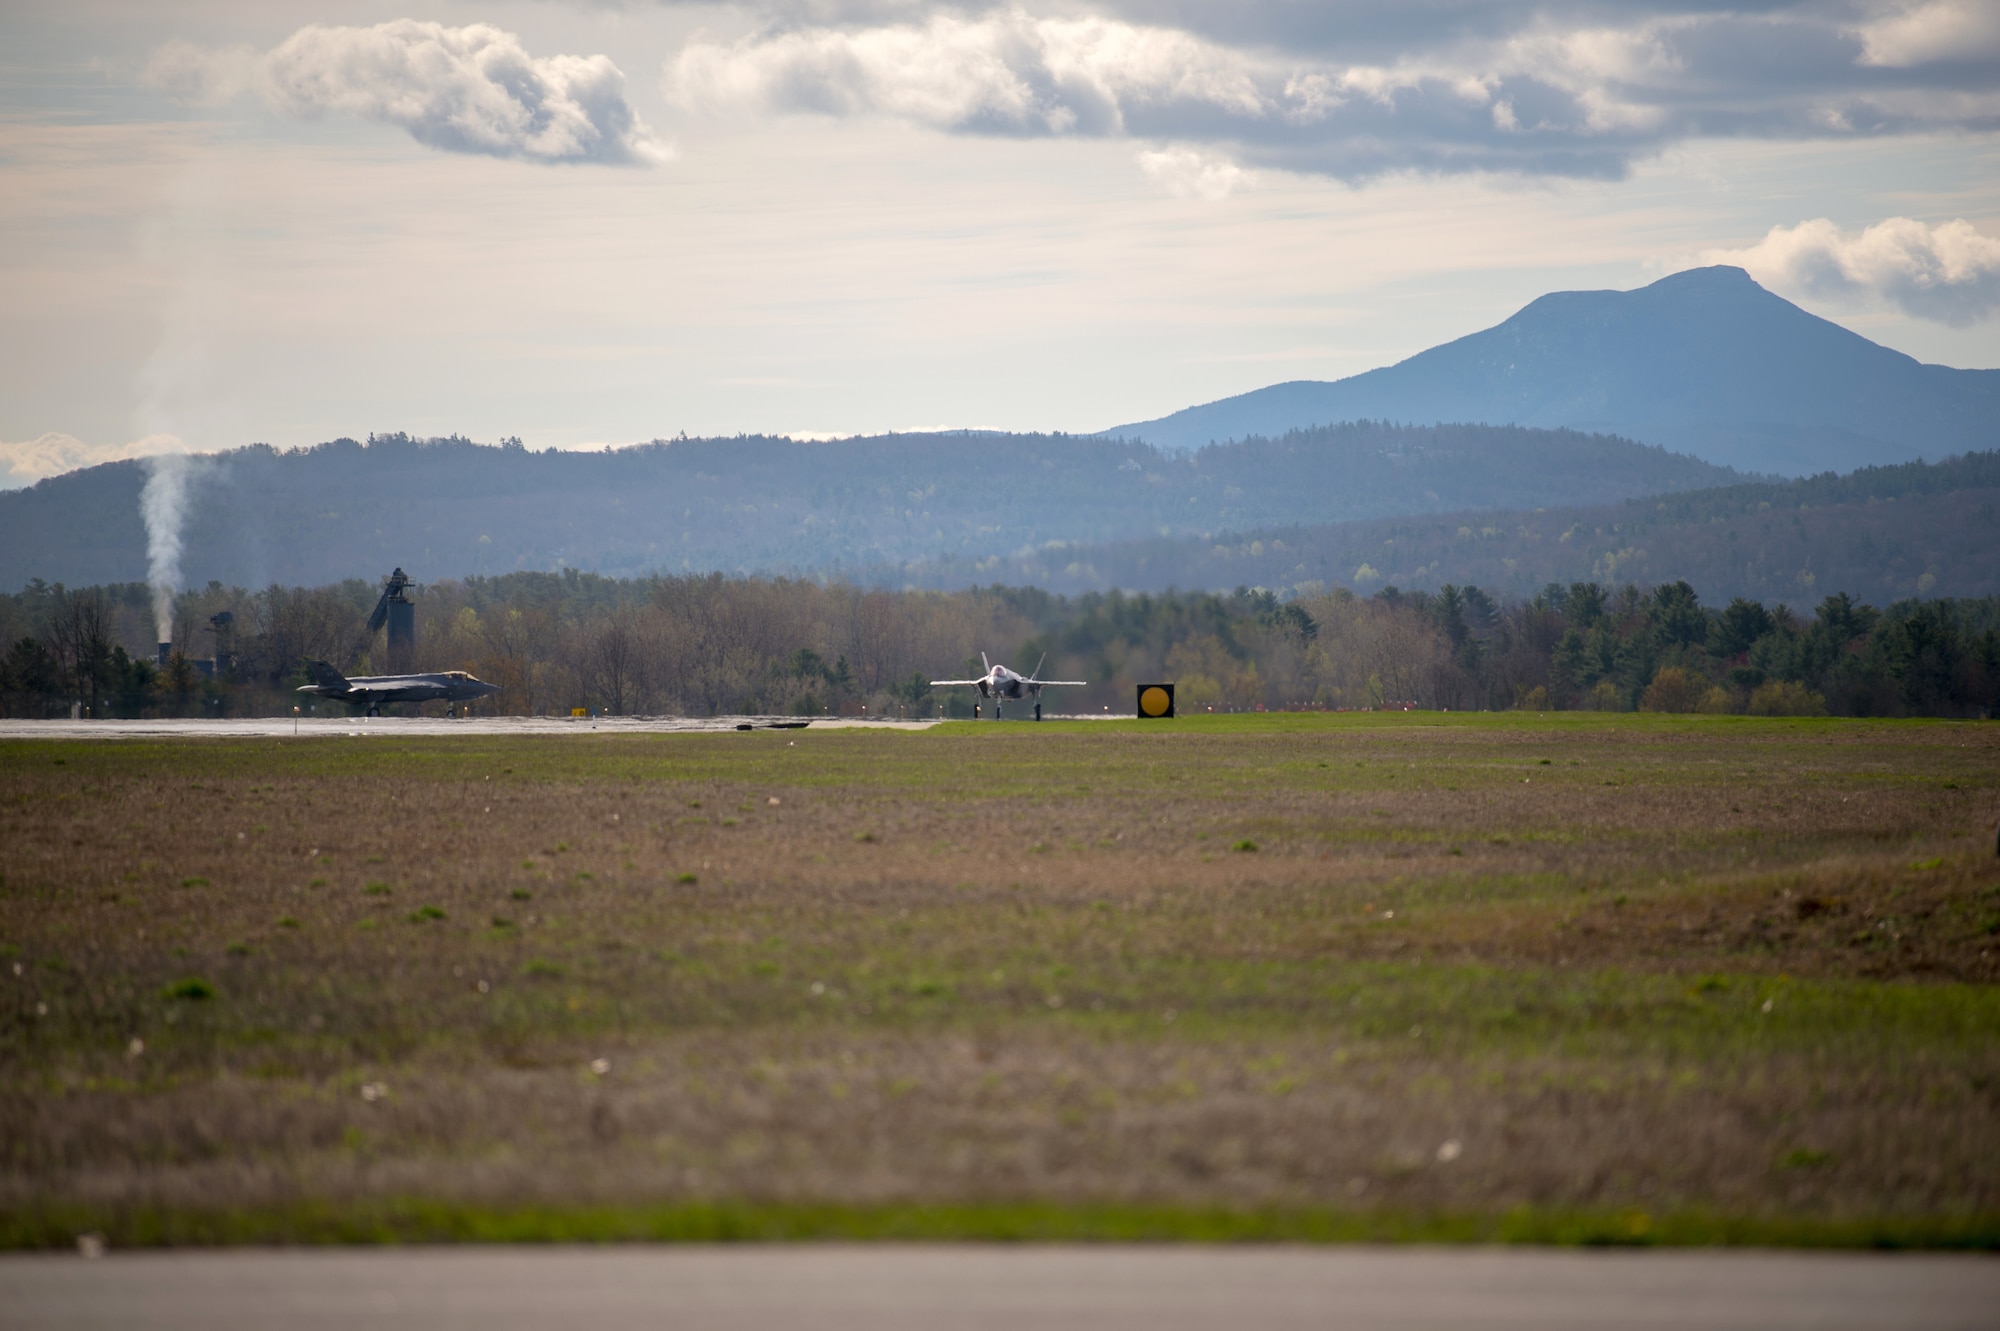 Two F-35 Lightning IIs approach the runway at the Vermont Air National Guard Base.